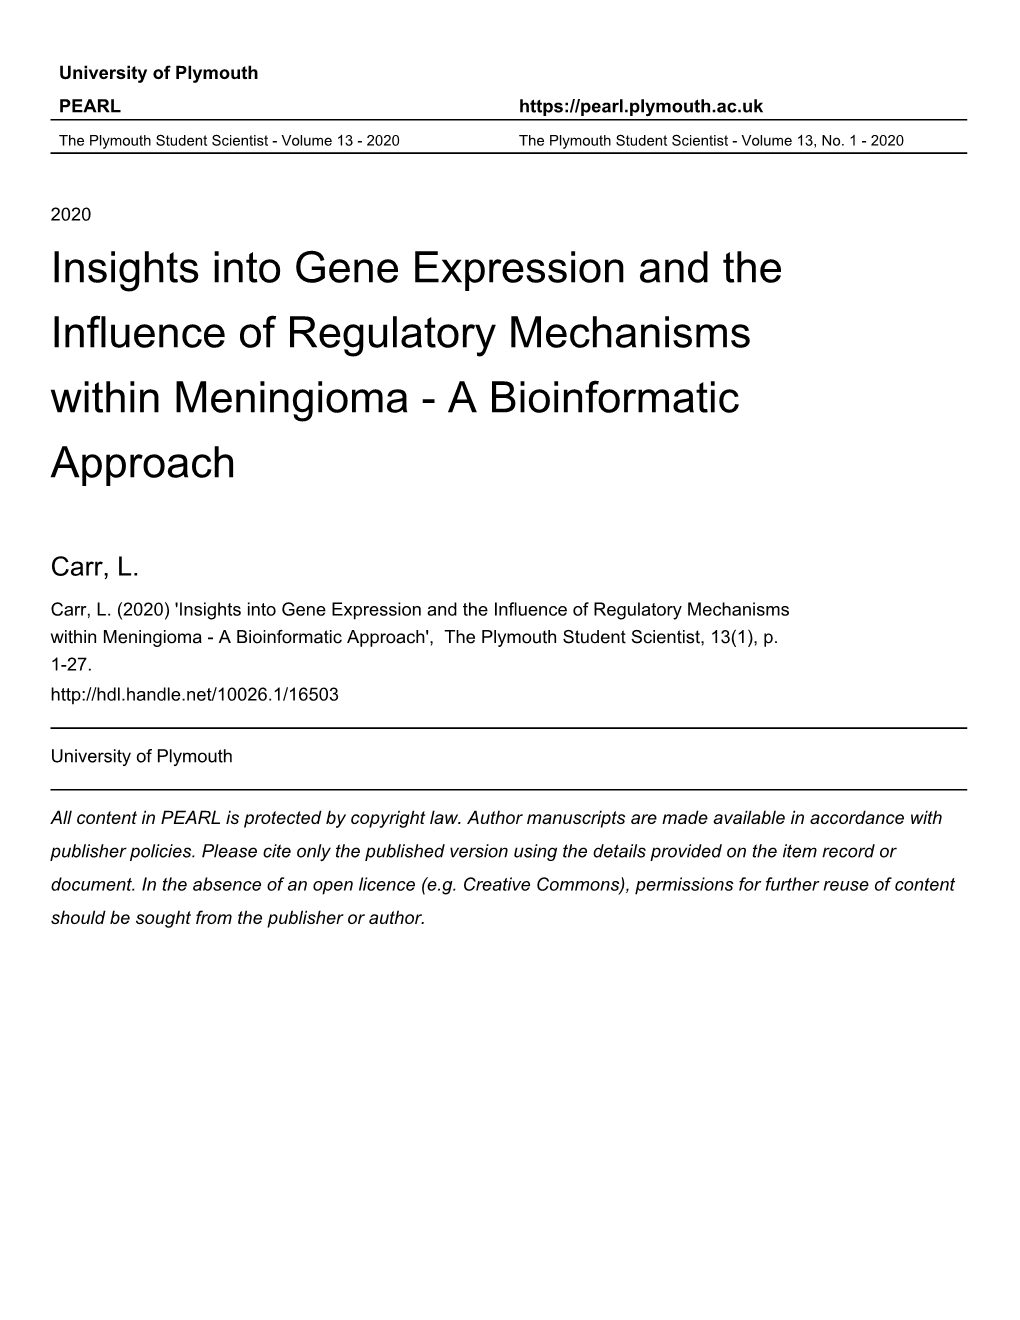 Insights Into Gene Expression and the Influence of Regulatory Mechanisms Within Meningioma - a Bioinformatic Approach